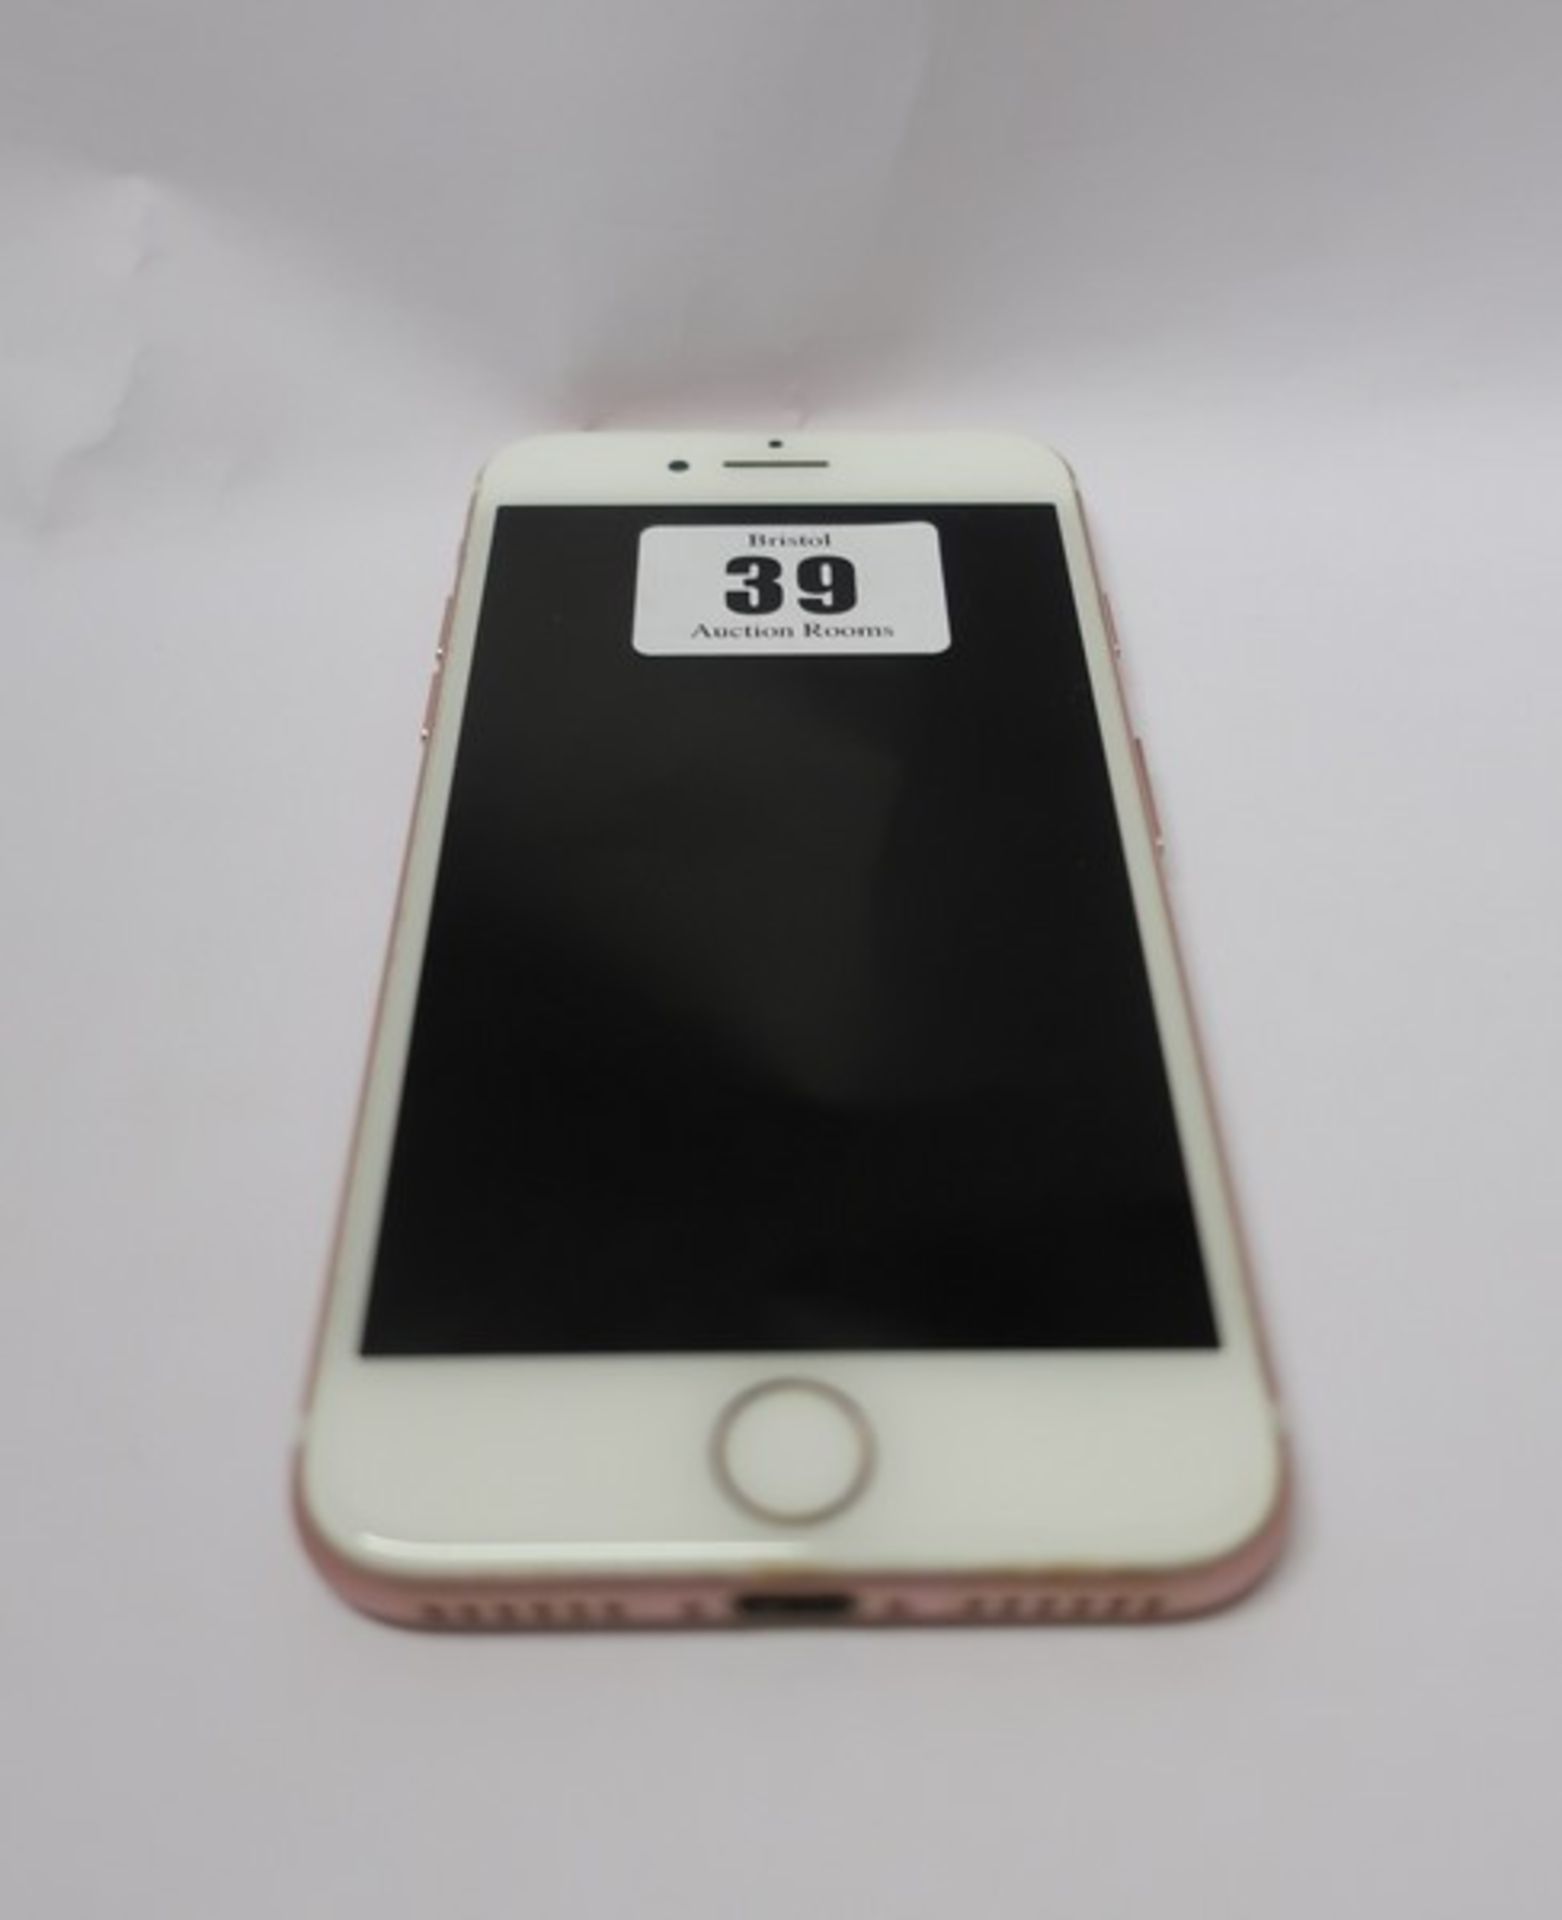 An Apple iPhone 7 128GB A1660 in Rose Gold (IMEI: 355824084159973) (Activation clear).